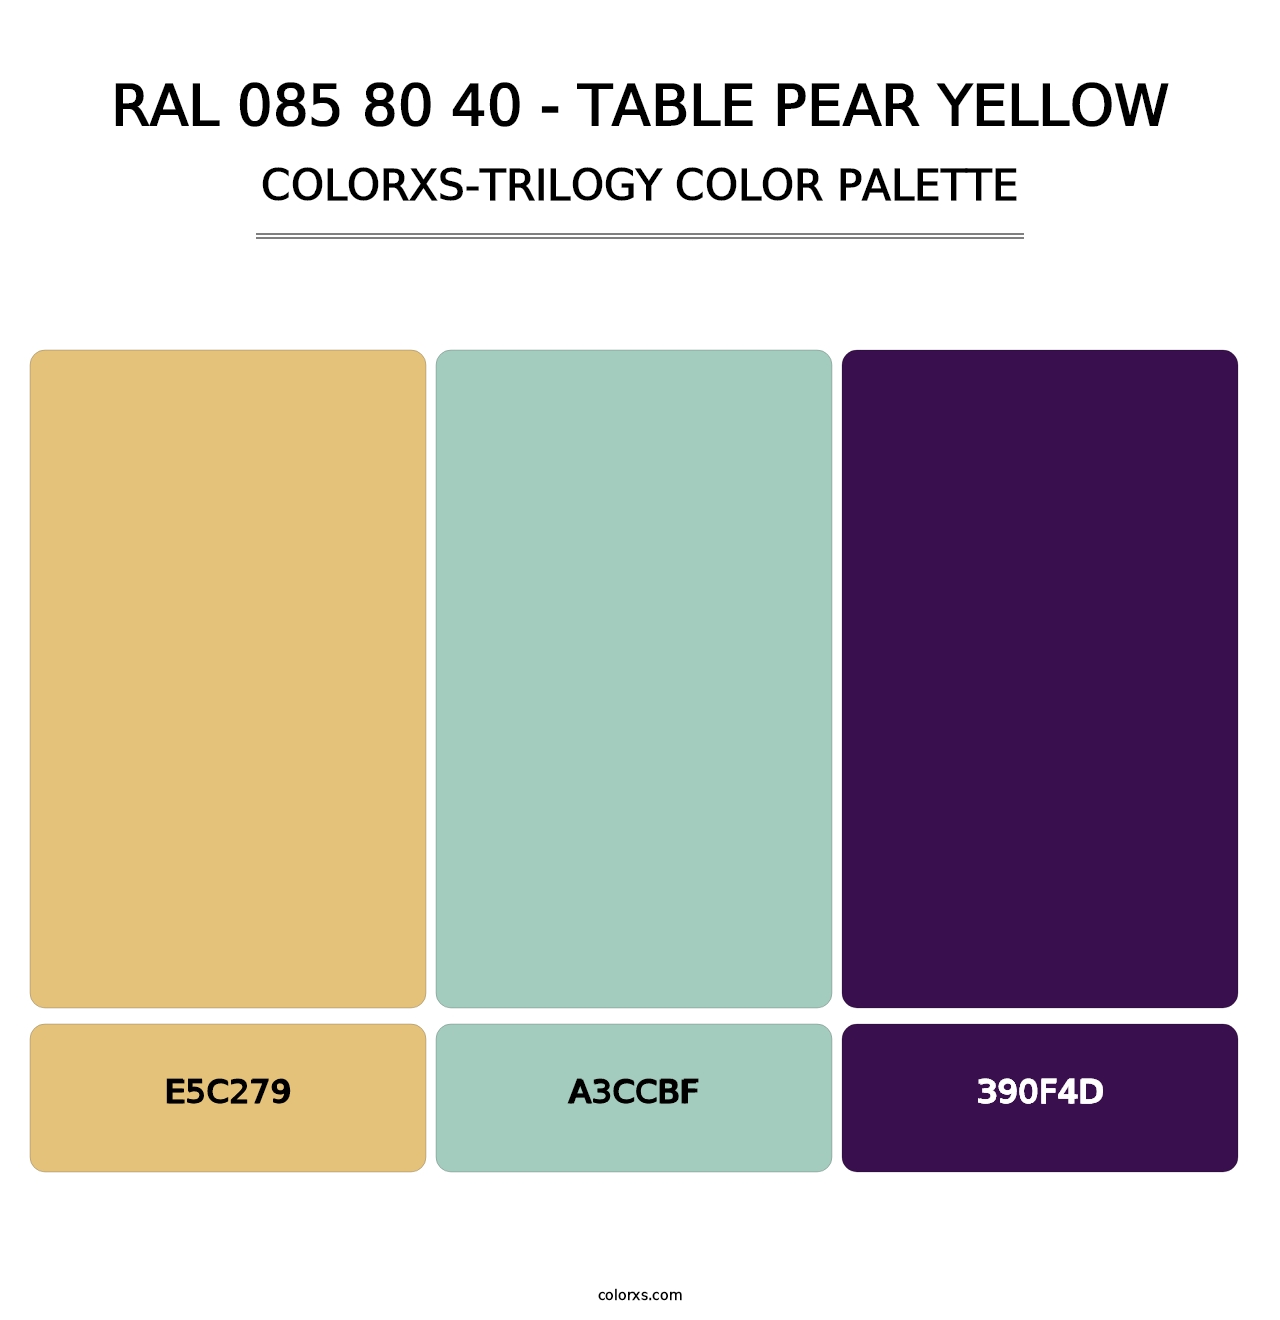 RAL 085 80 40 - Table Pear Yellow - Colorxs Trilogy Palette